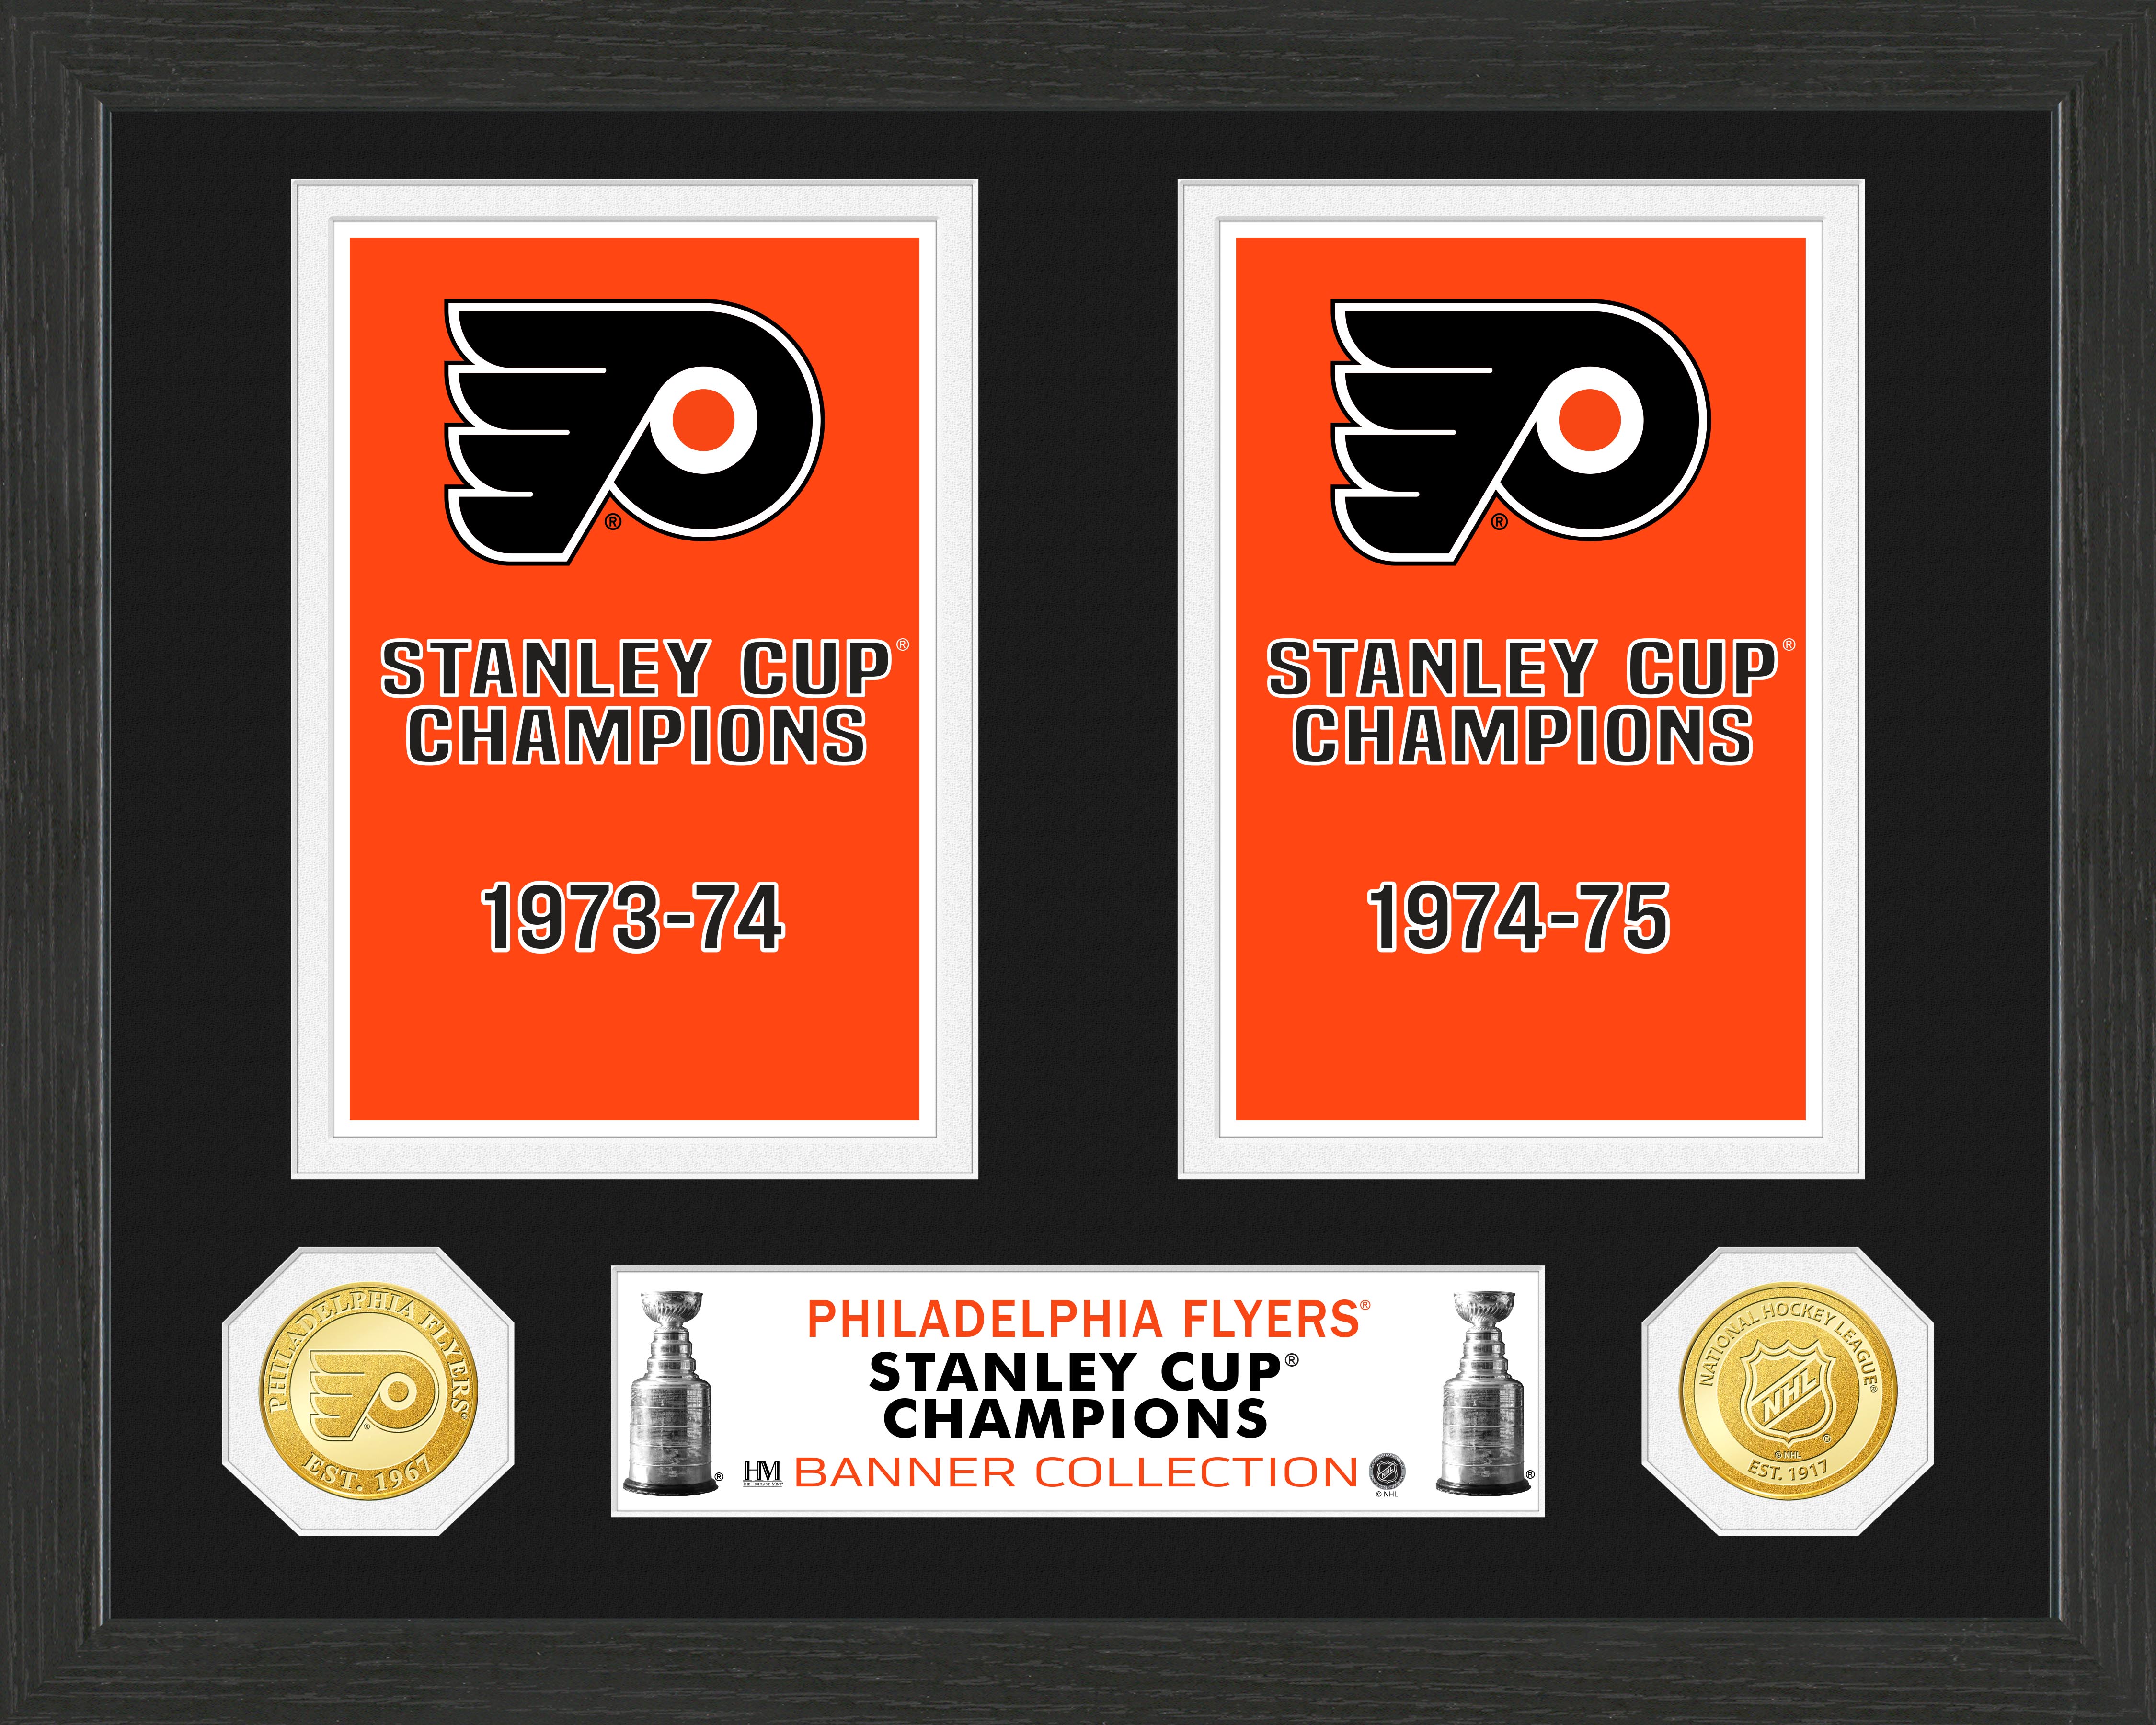 Philadelphia Flyers Stanley Cup Banner Collection Bronze Photo Mint